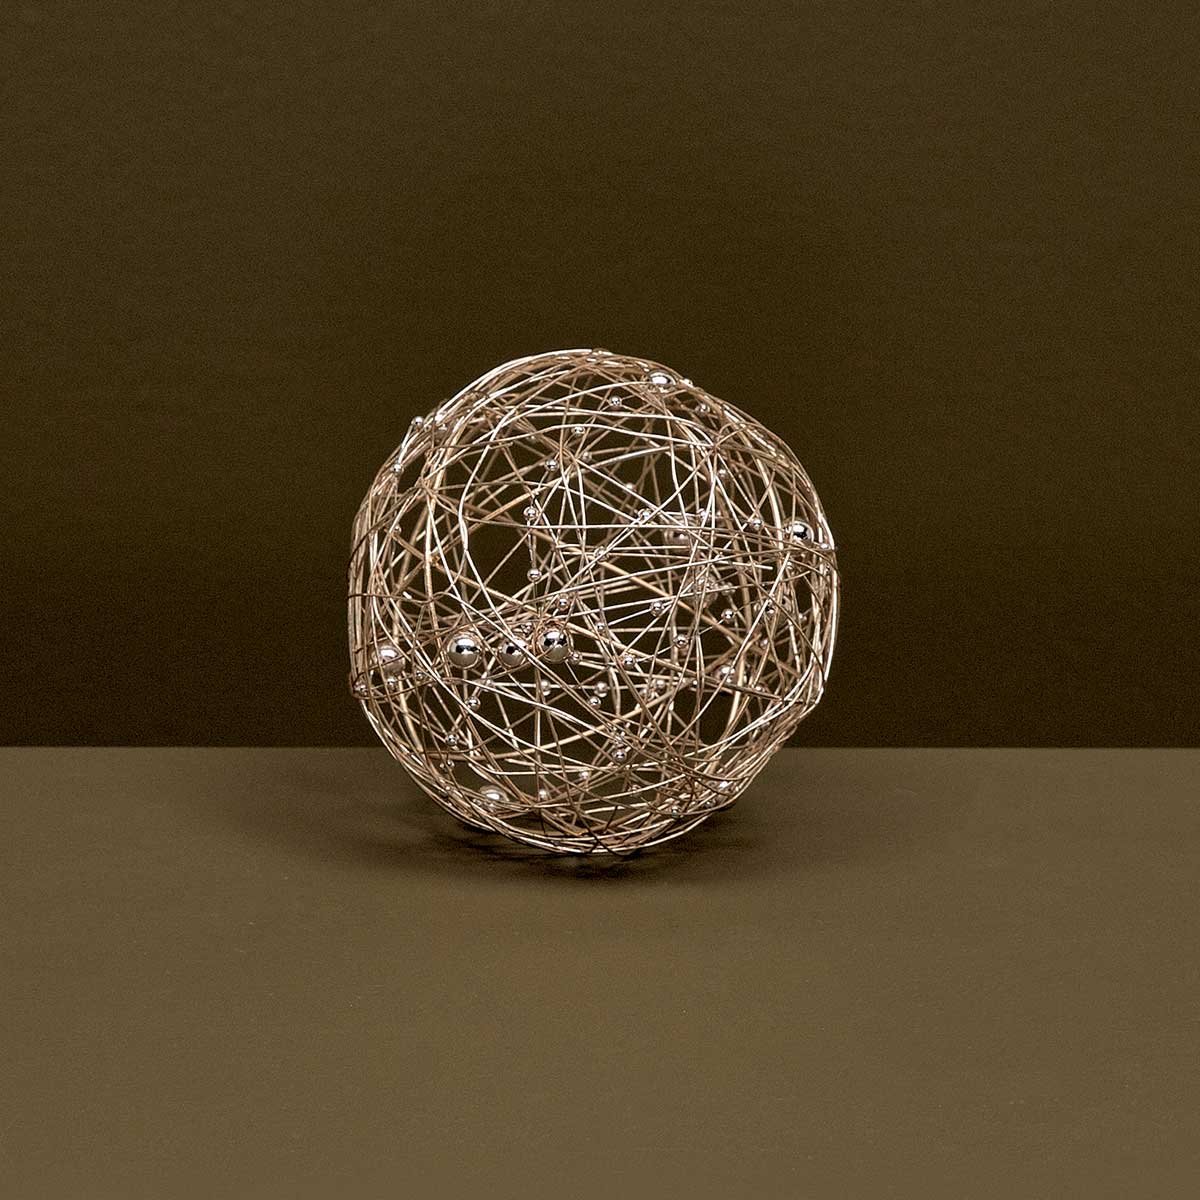 DECORATIVE WIRE BALL CHAMPAGNE WITH BEADS SMALL 3.75"